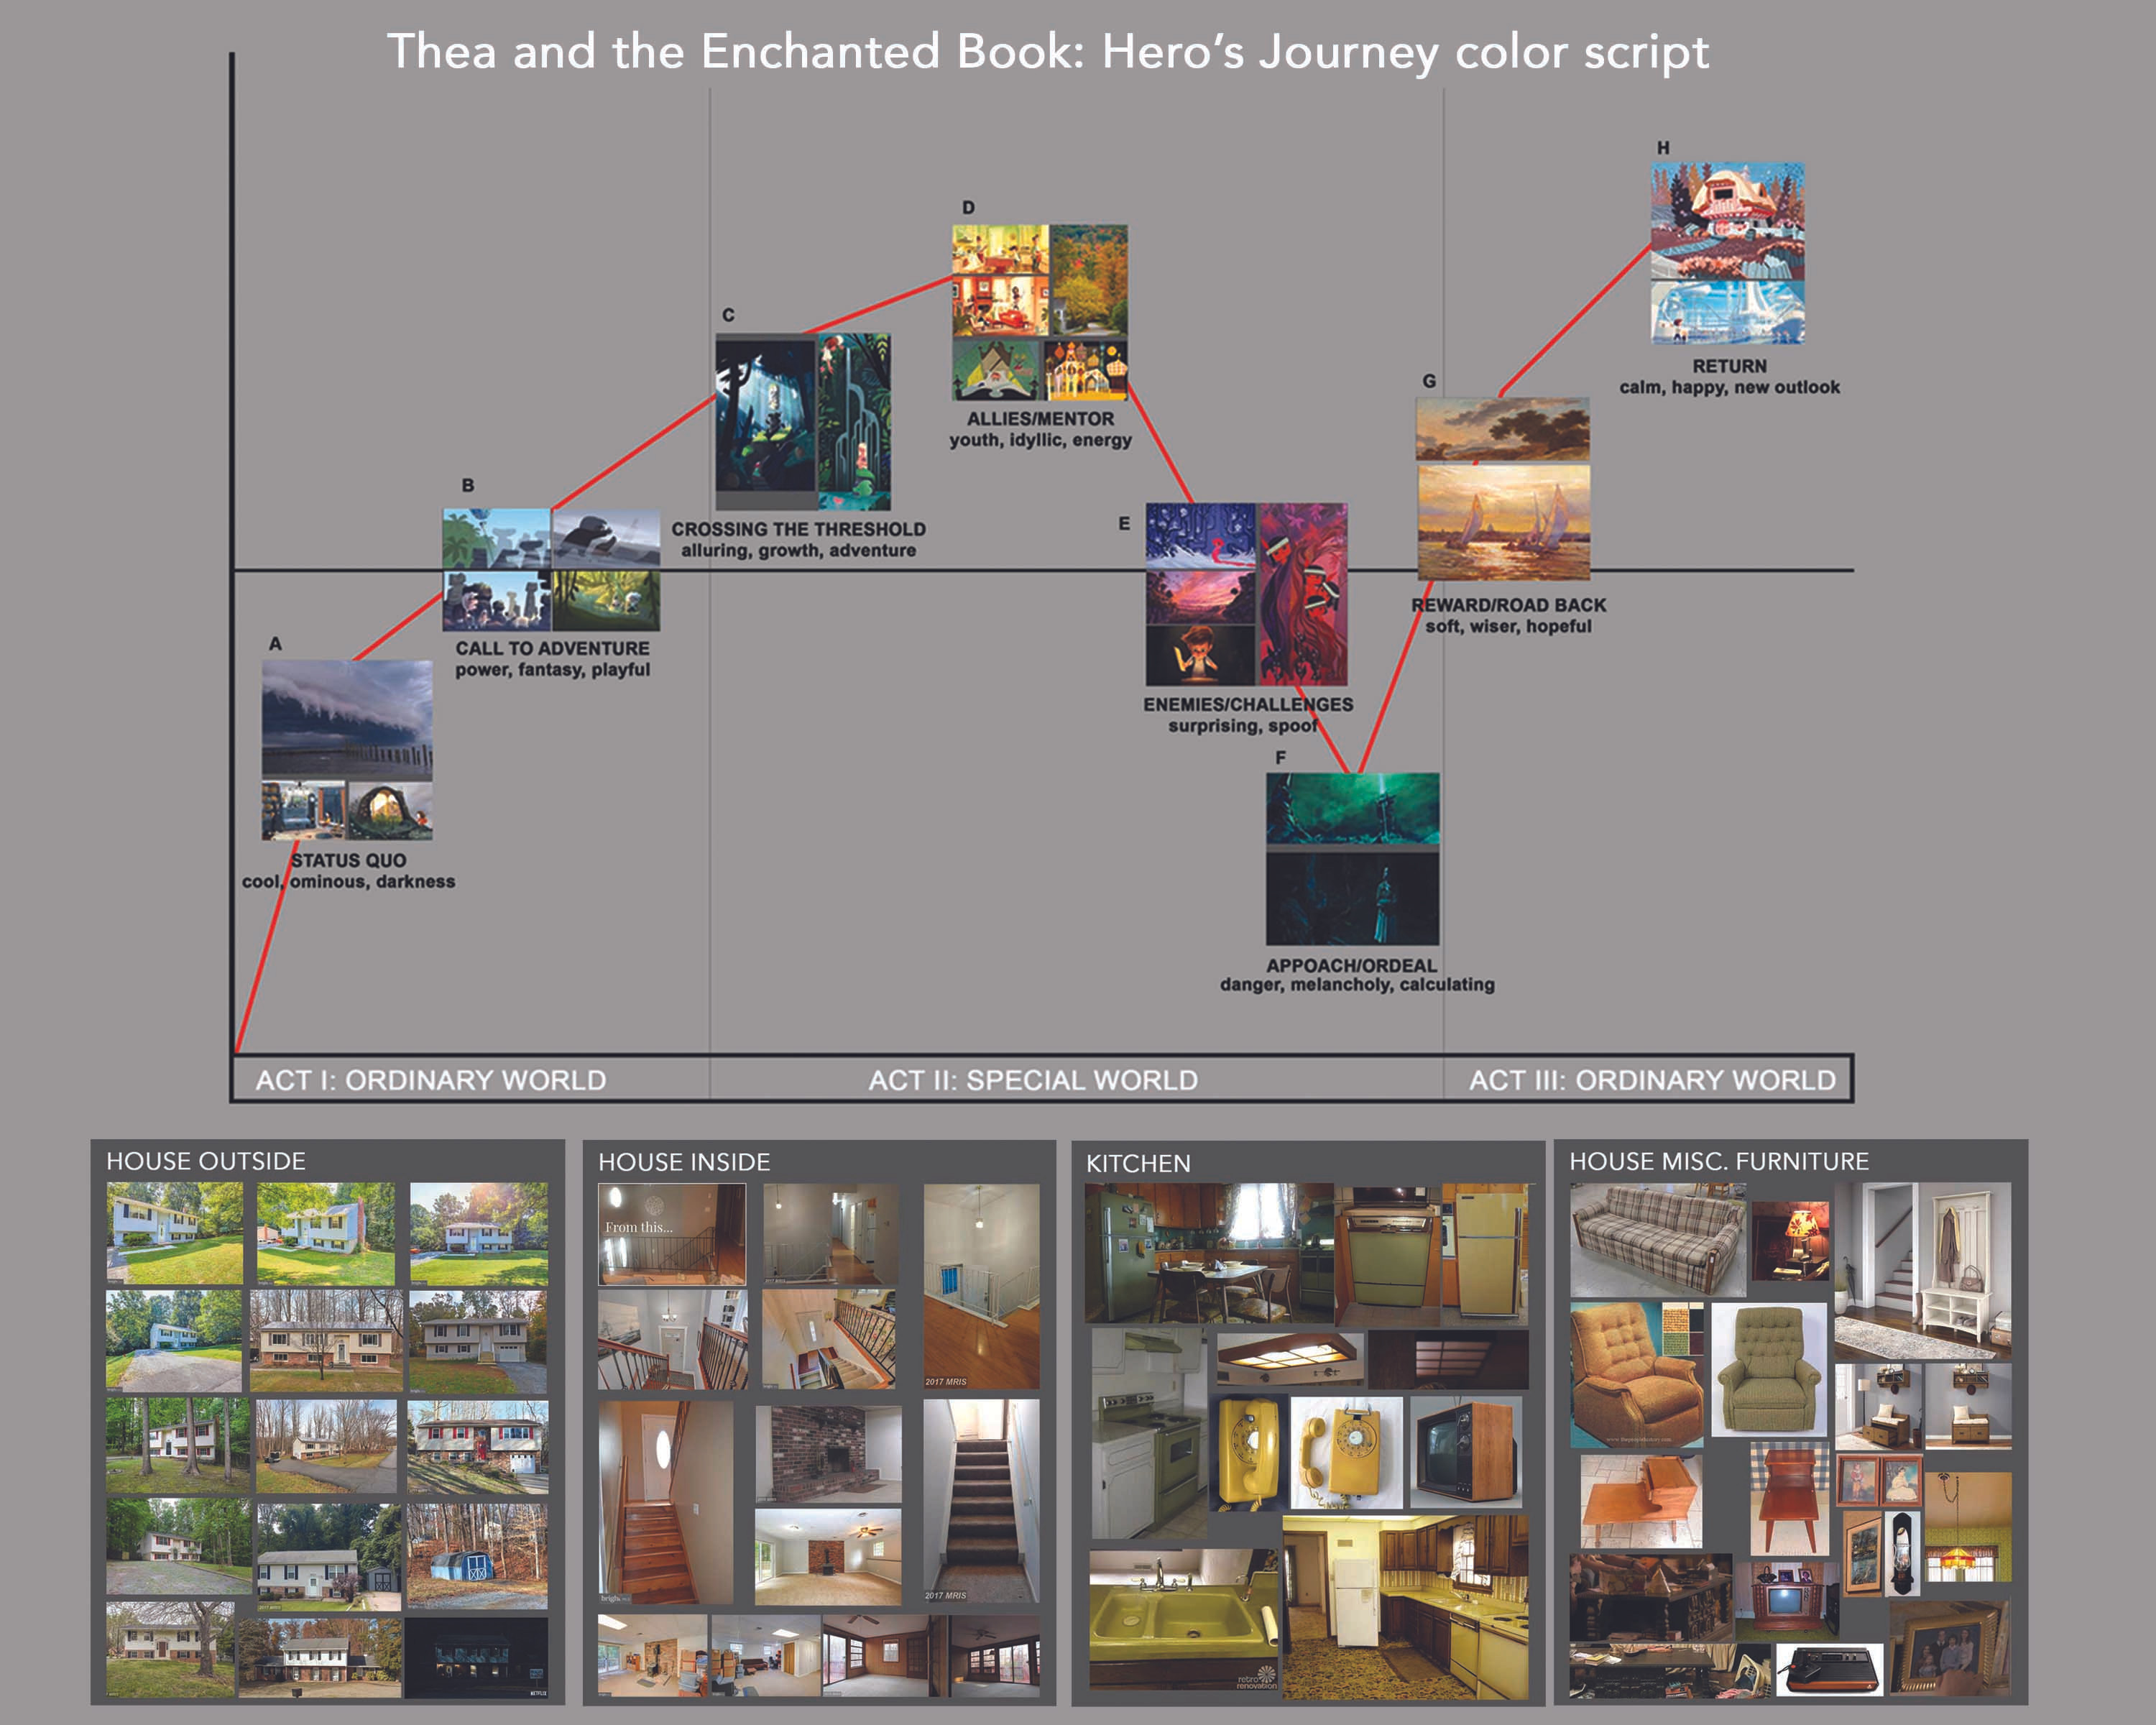 Step 1: Time period research and how color evolves through the story journey.  The pilot takes place in Act 1 and ends with a taste of Thea entering the special world in Act 2.